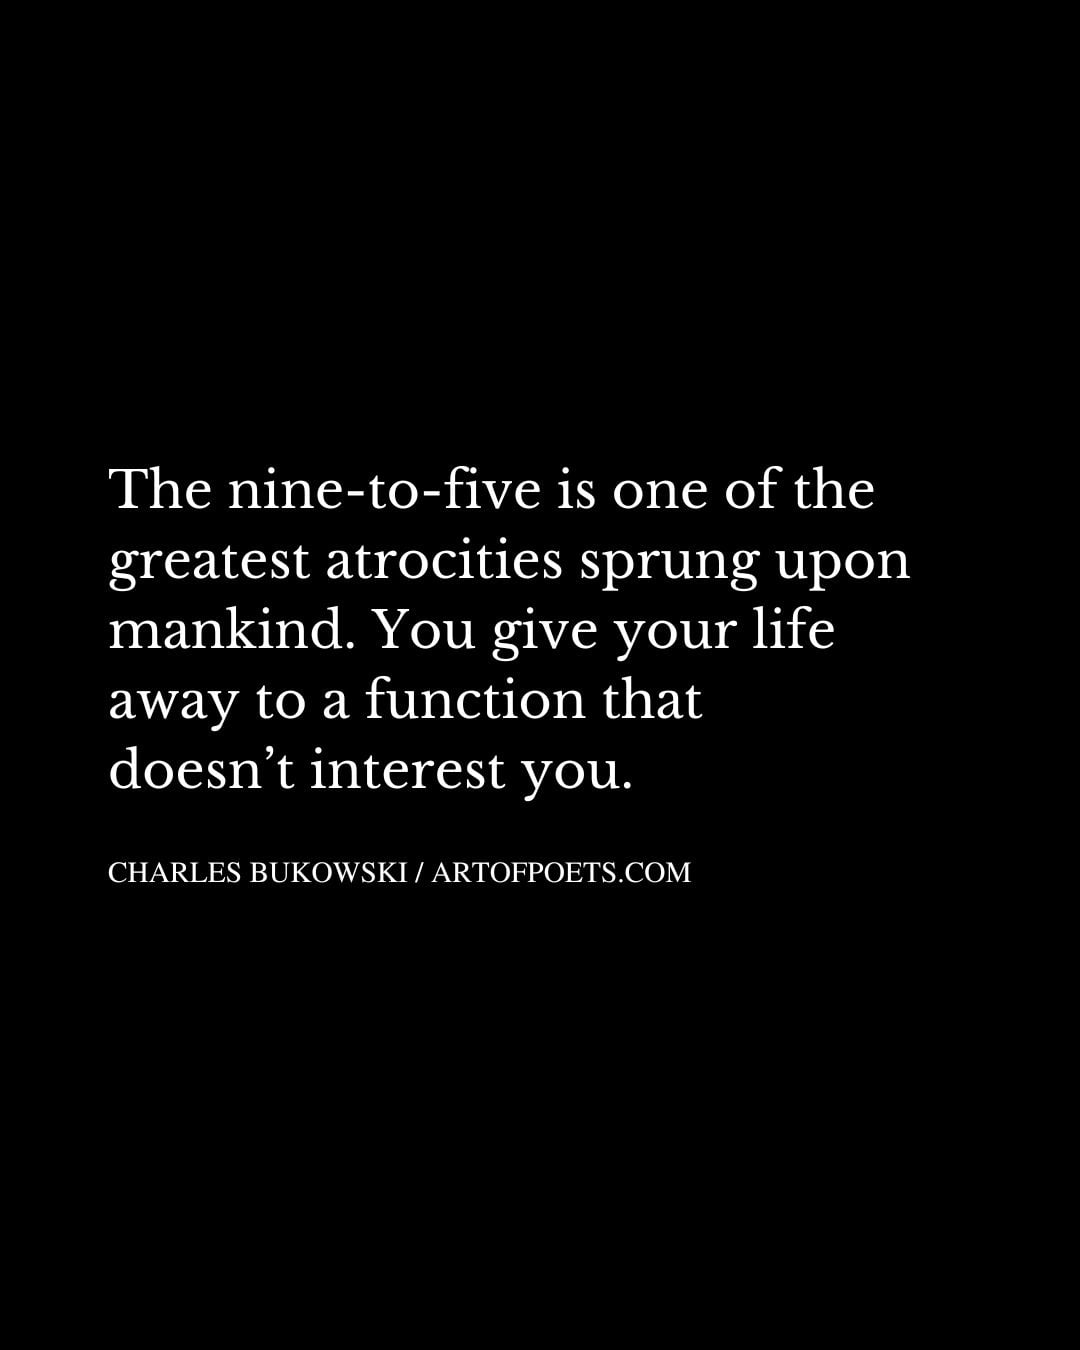 The nine to five is one of the greatest atrocities sprung upon mankind. You give your life away to a function that doesnt interest you